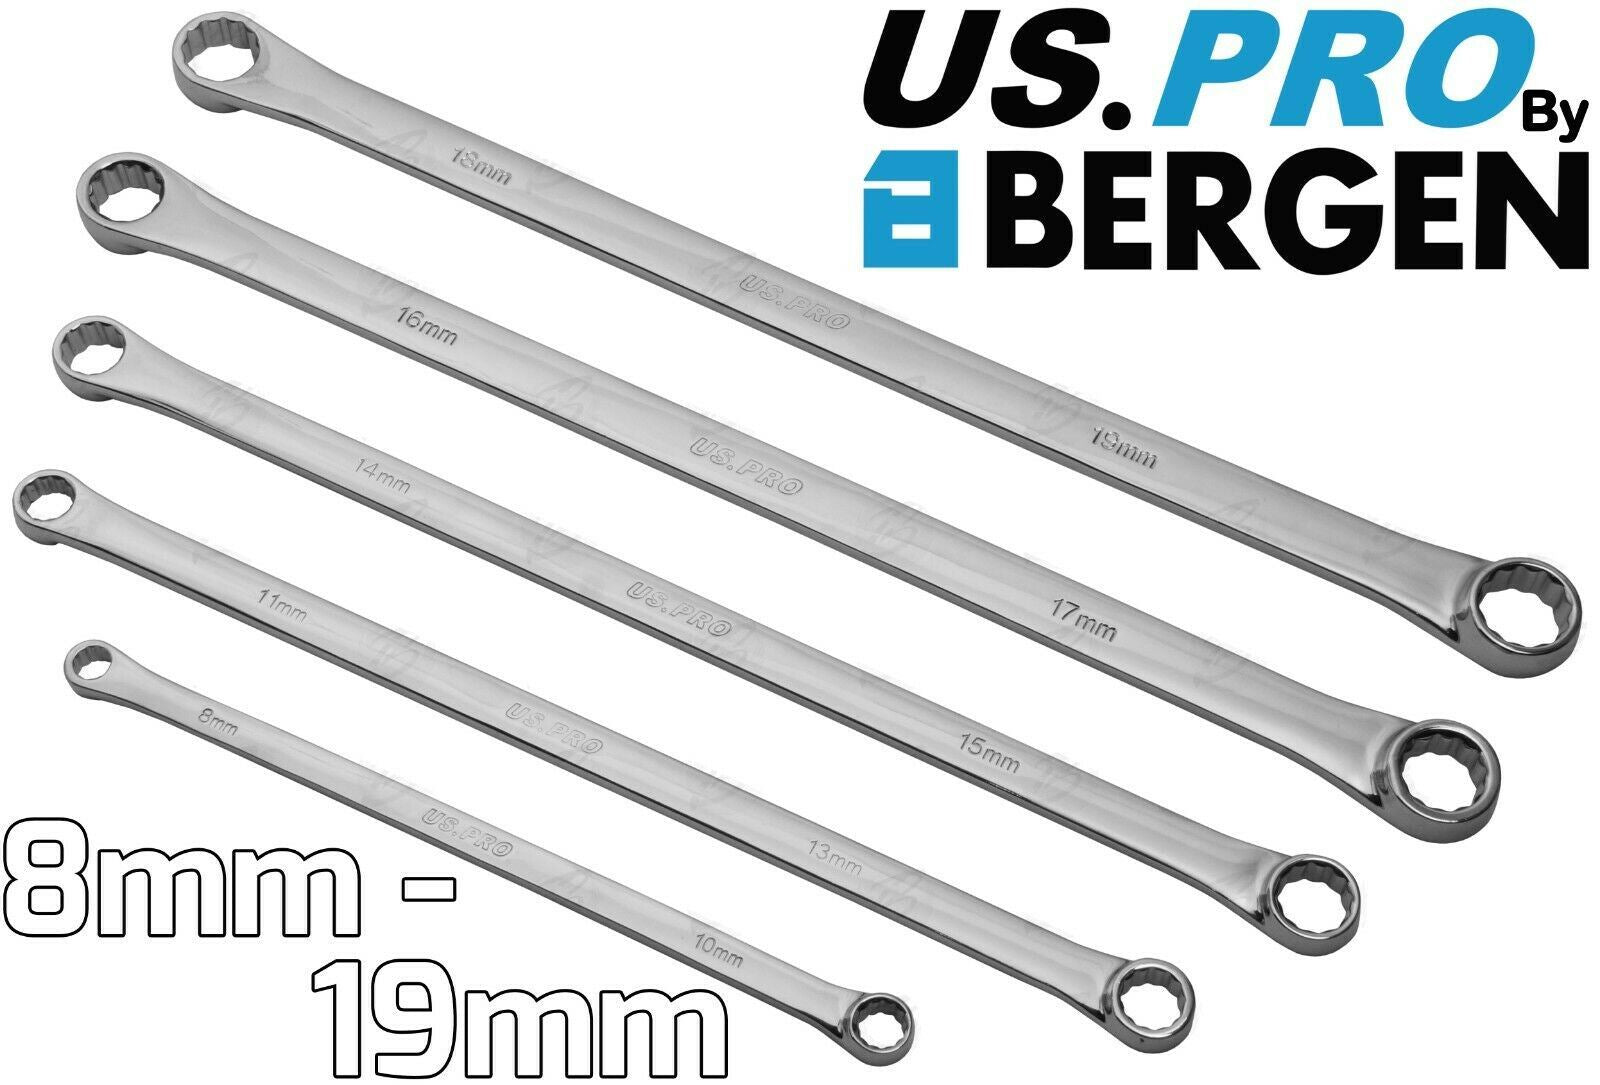 US PRO 5PCS EXTRA LONG AVIATION SPANNERS 8MM - 19MM